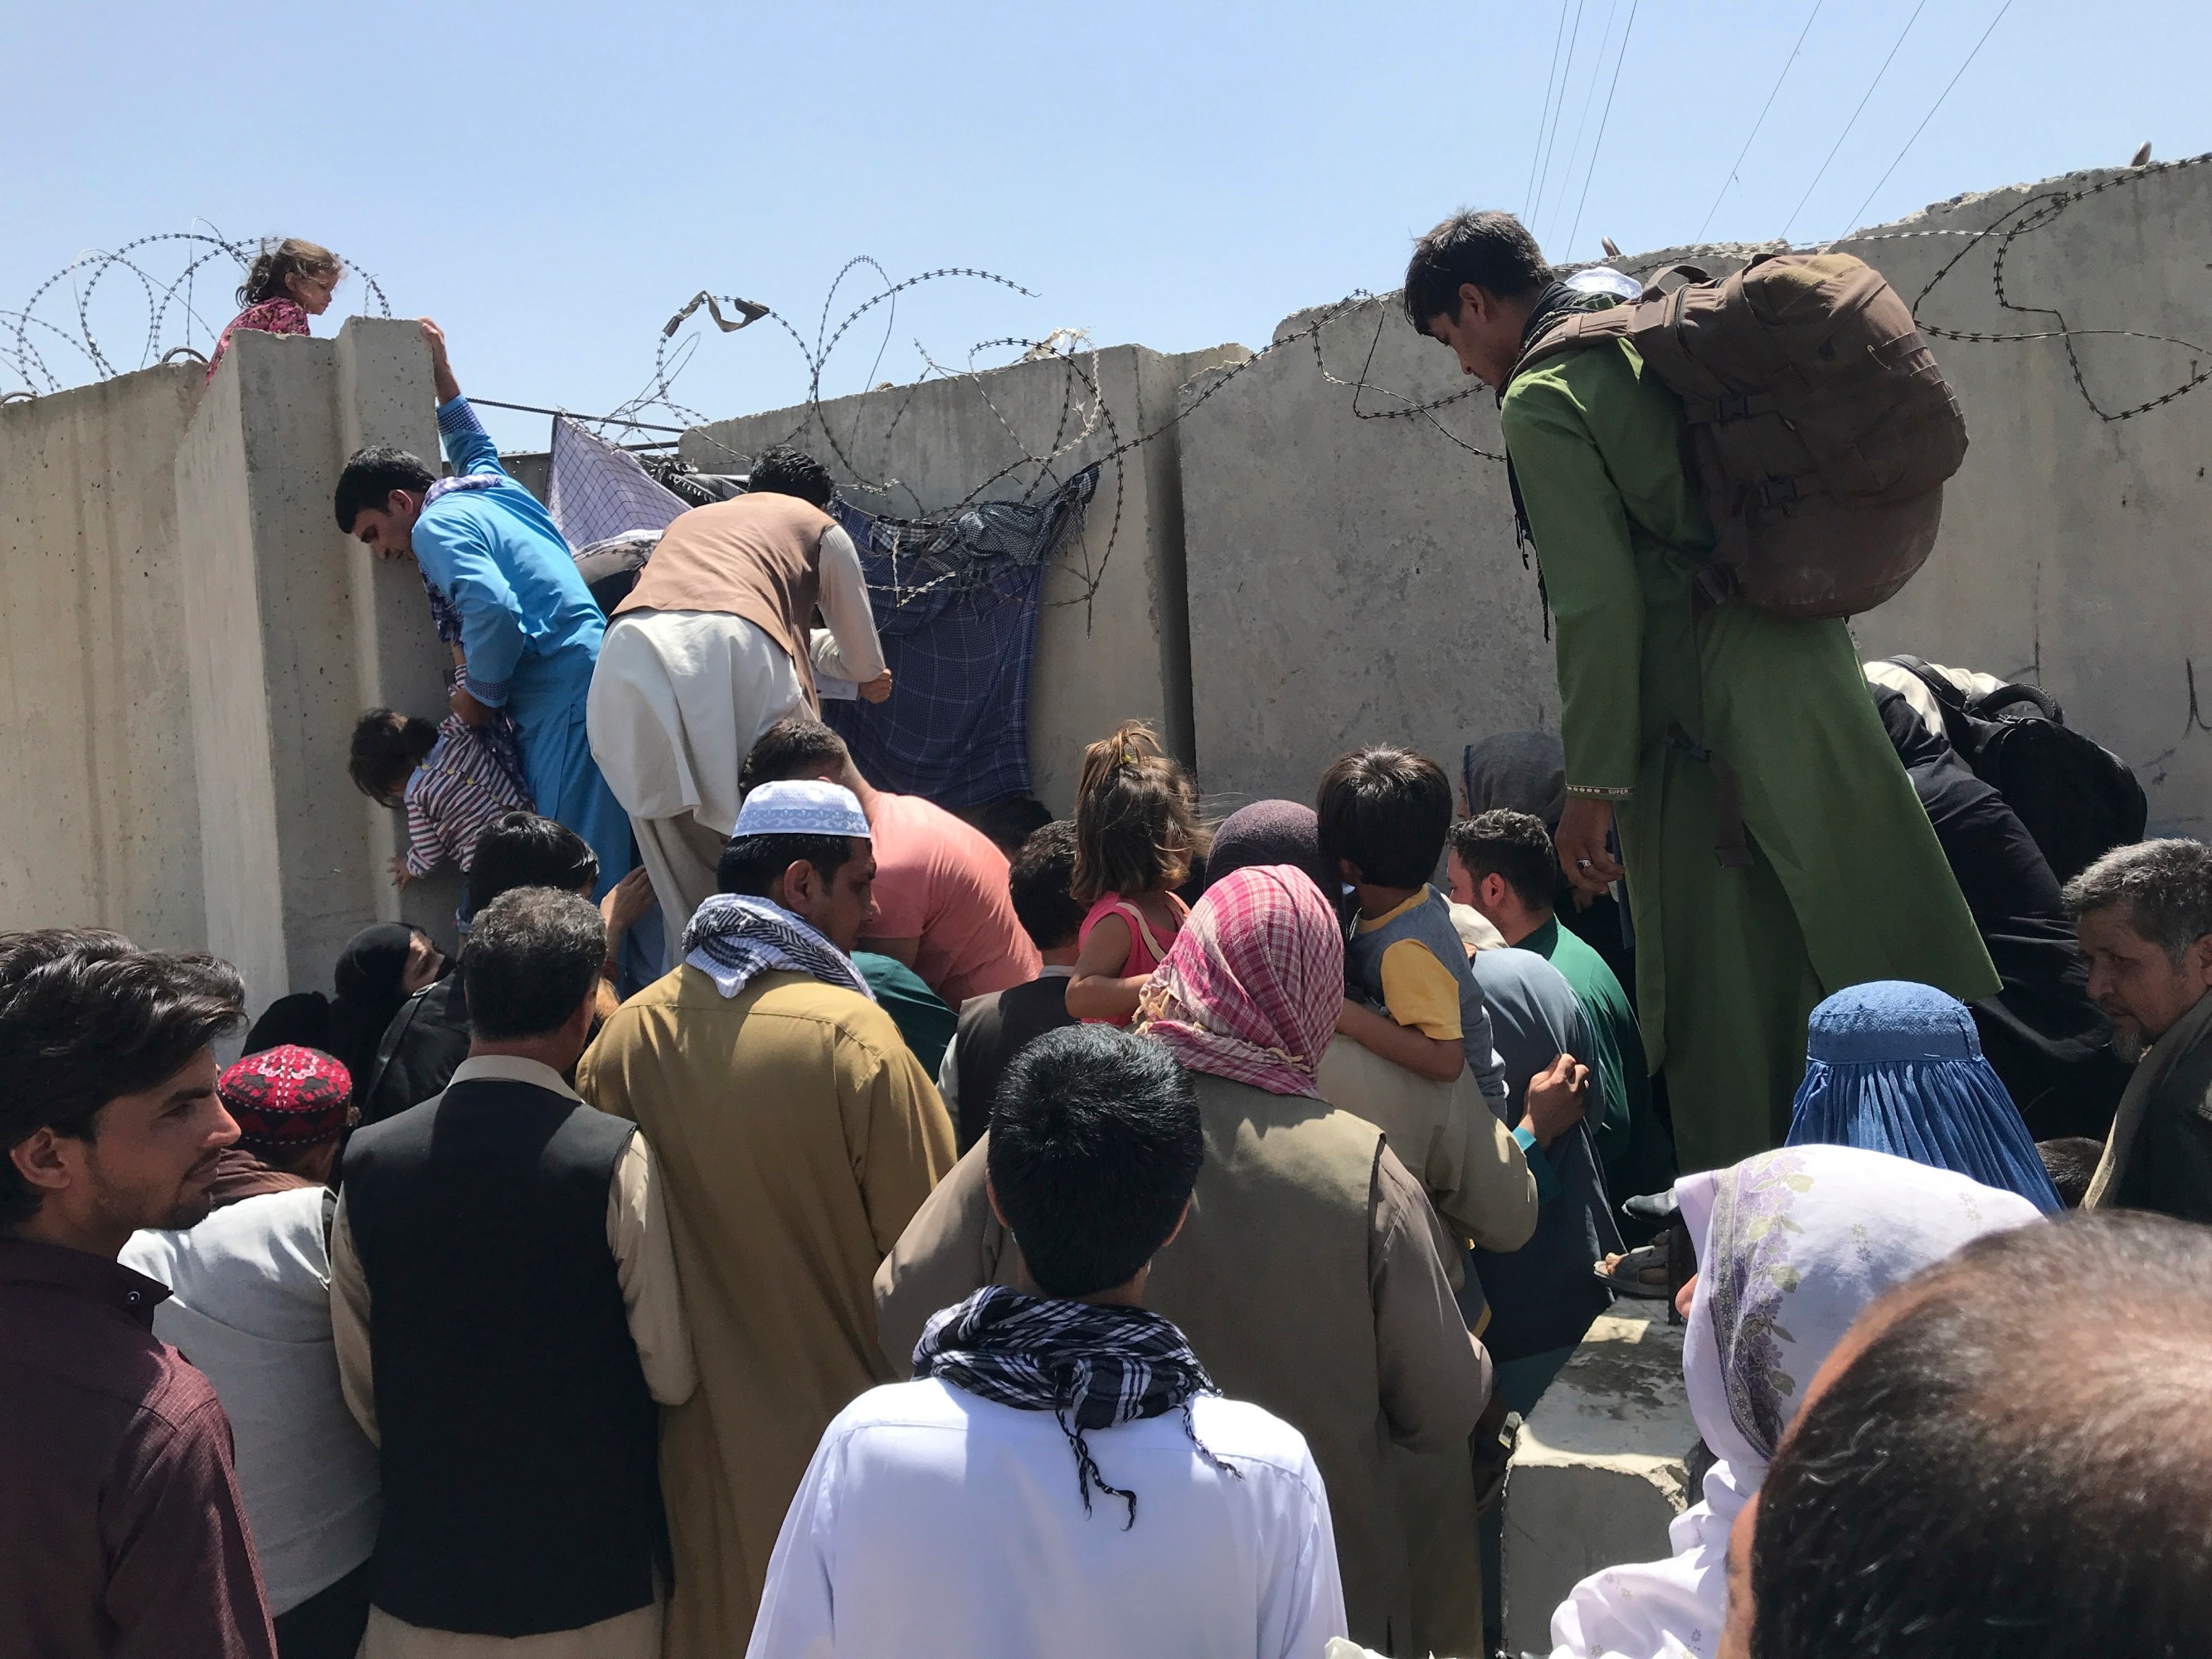 People struggle to cross the boundary wall of Hamid Karzai International Airport in Kabul.